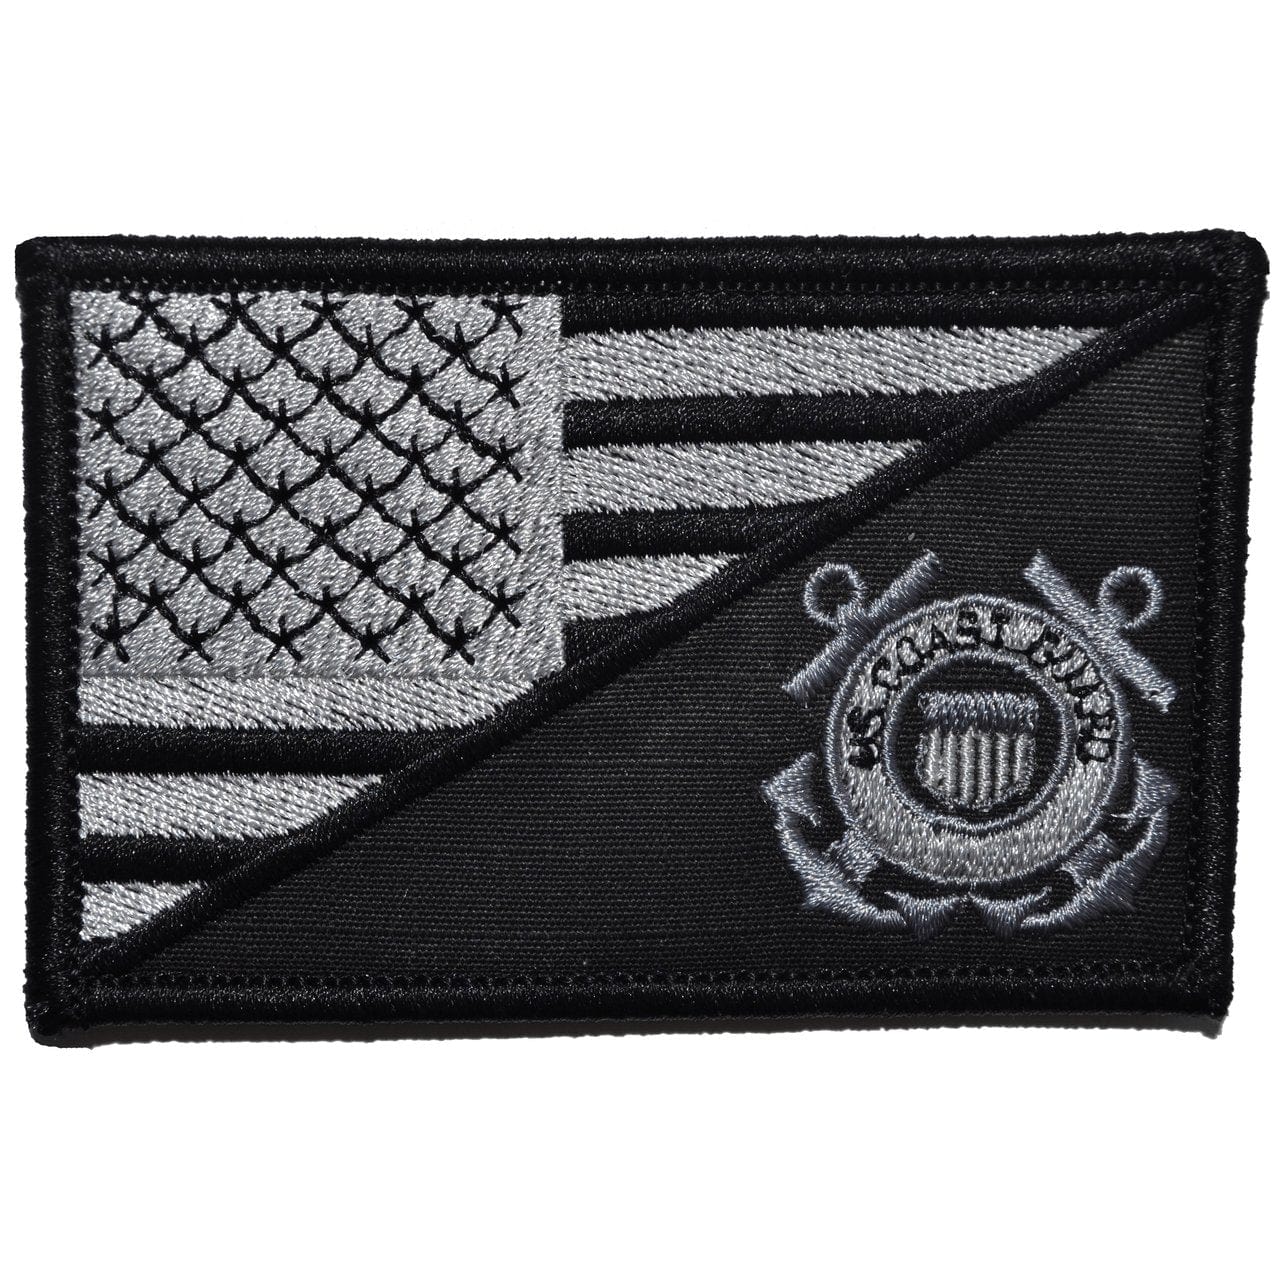 Tactical Gear Junkie Patches Black Coast Guard USA Flag - 2.25x3.5 Patch